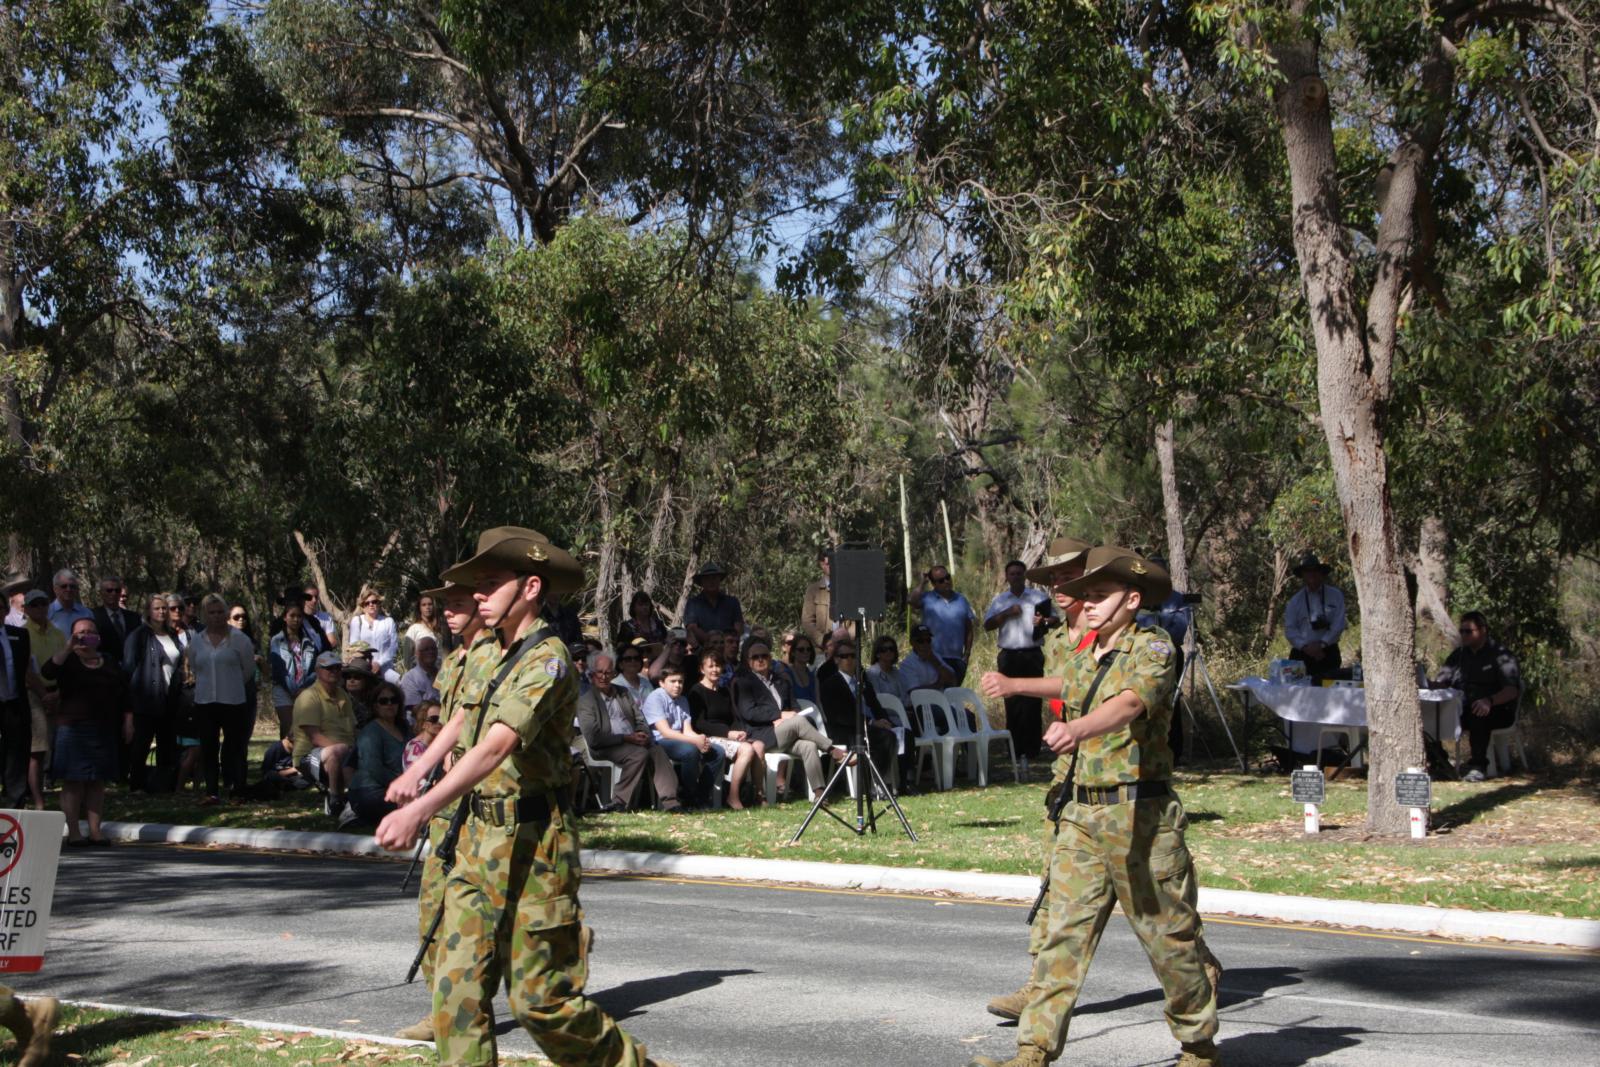 Catafalque party, comprising cadets of 53 Army Cadet Unit, Wanneroo